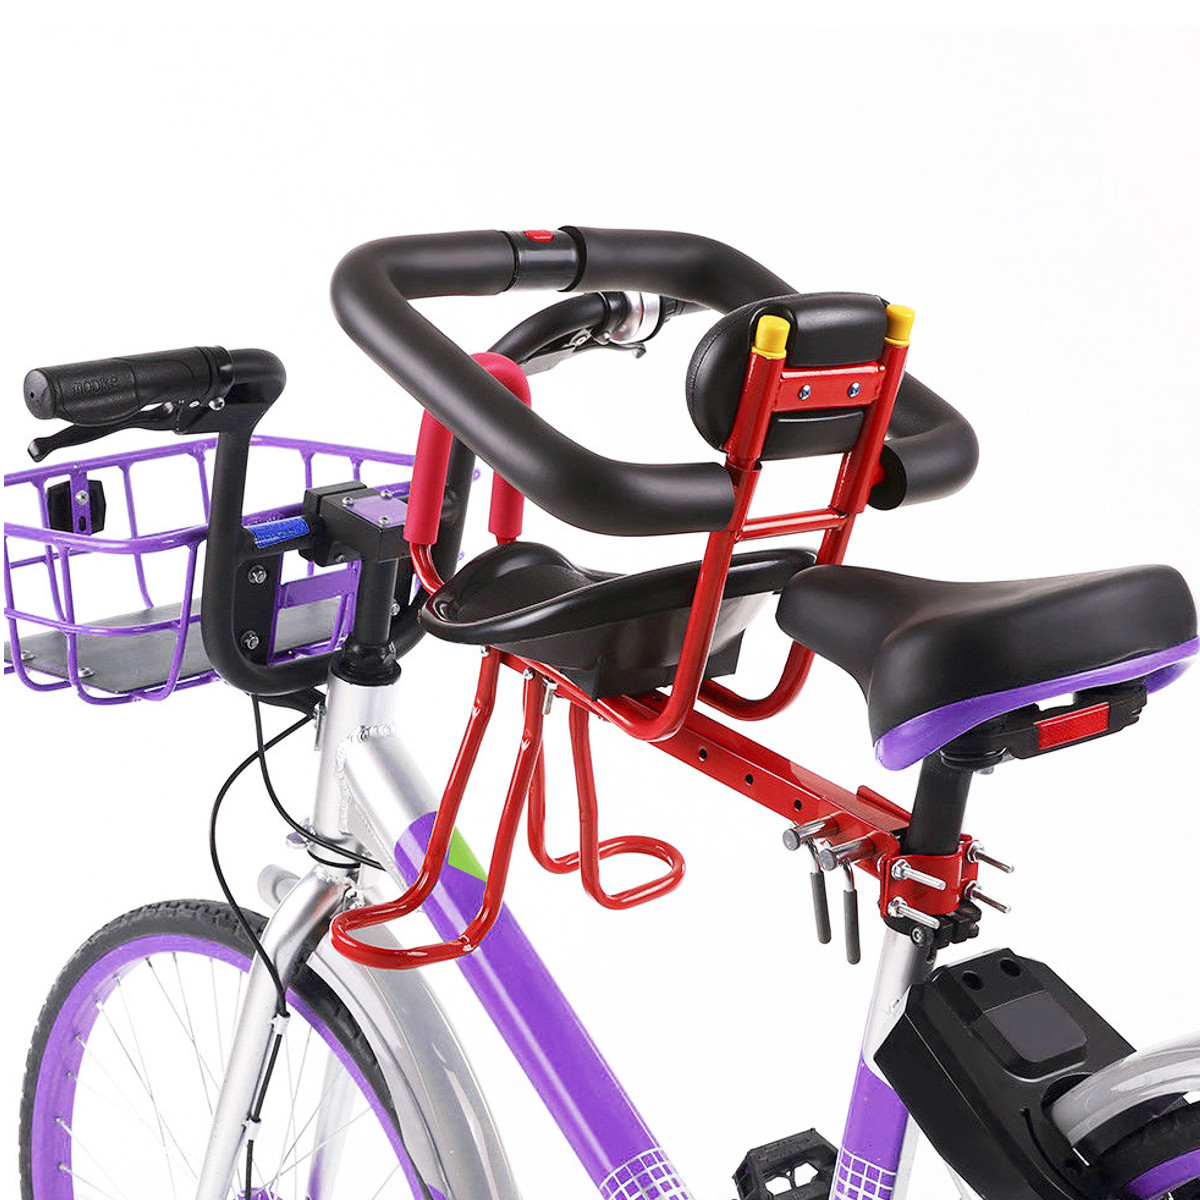 

BIKIGHT Bike Kids Rack Mount Seat Protection Safety Quick Release Lock Cycling Children Front Saddle Chair Bike Accessories